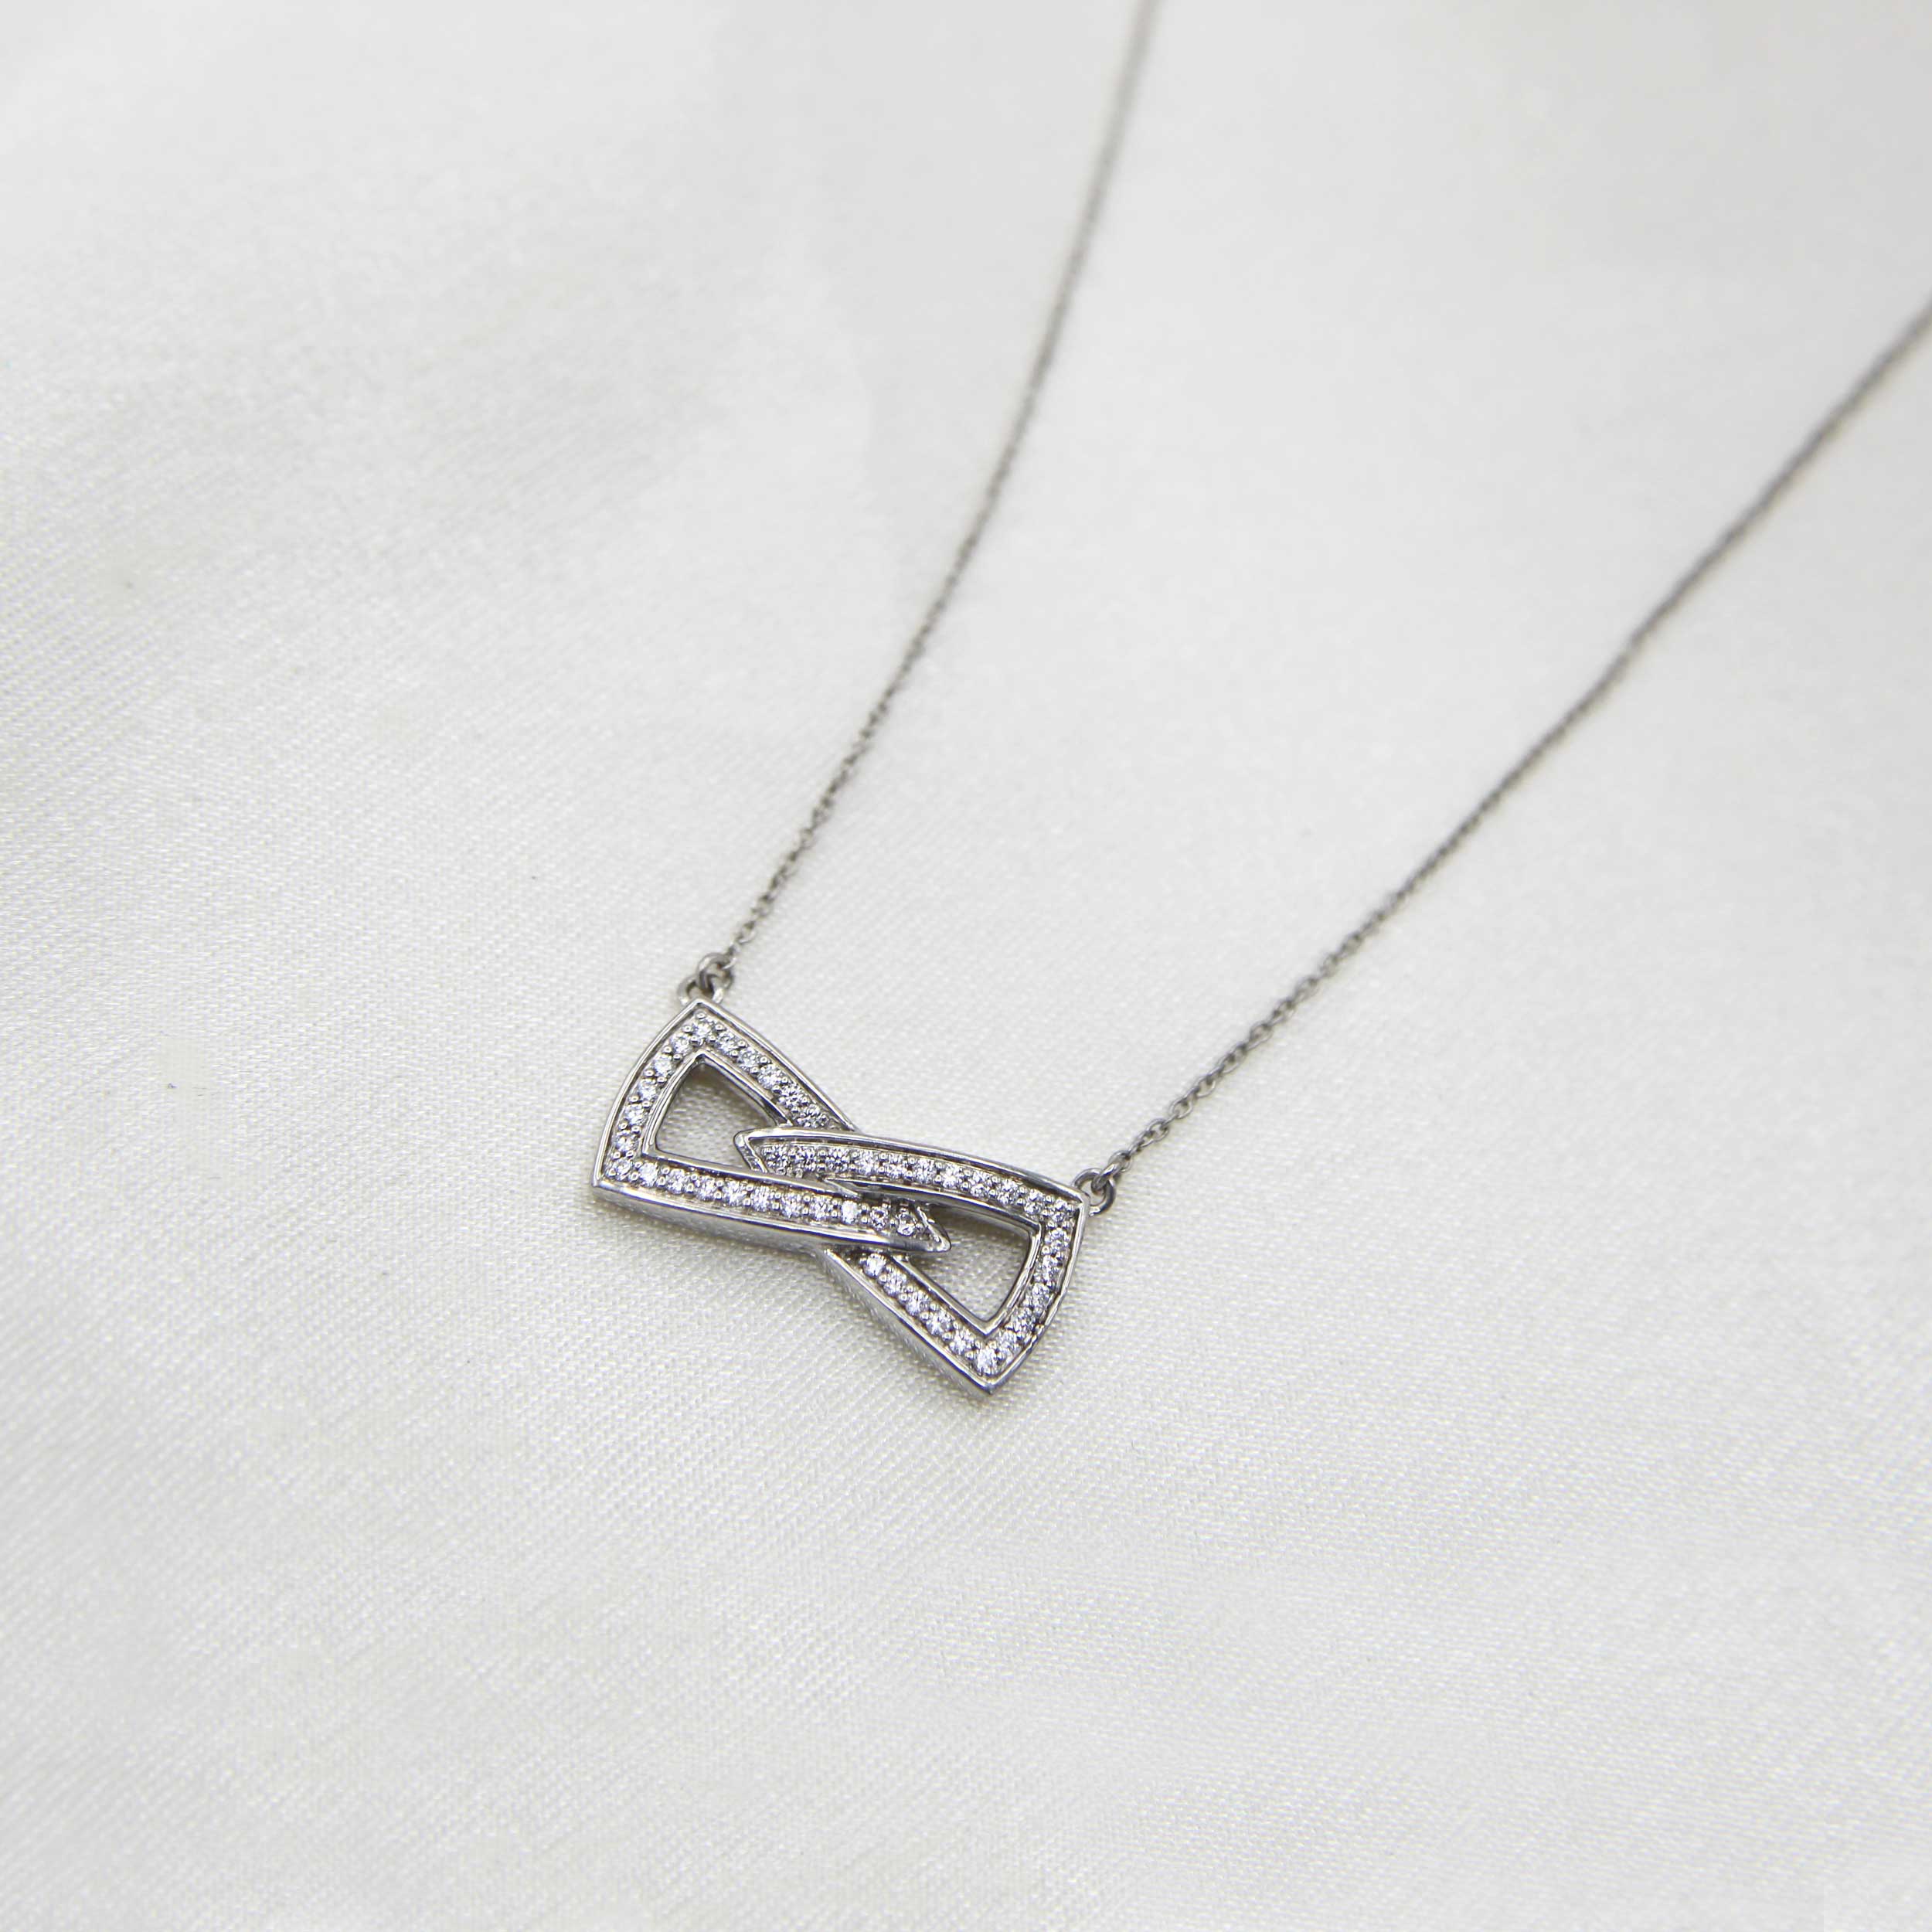 Sterling Silver, Jersey Collection, Medium Number 99 Pendant by The Black Bow Jewelry Co.